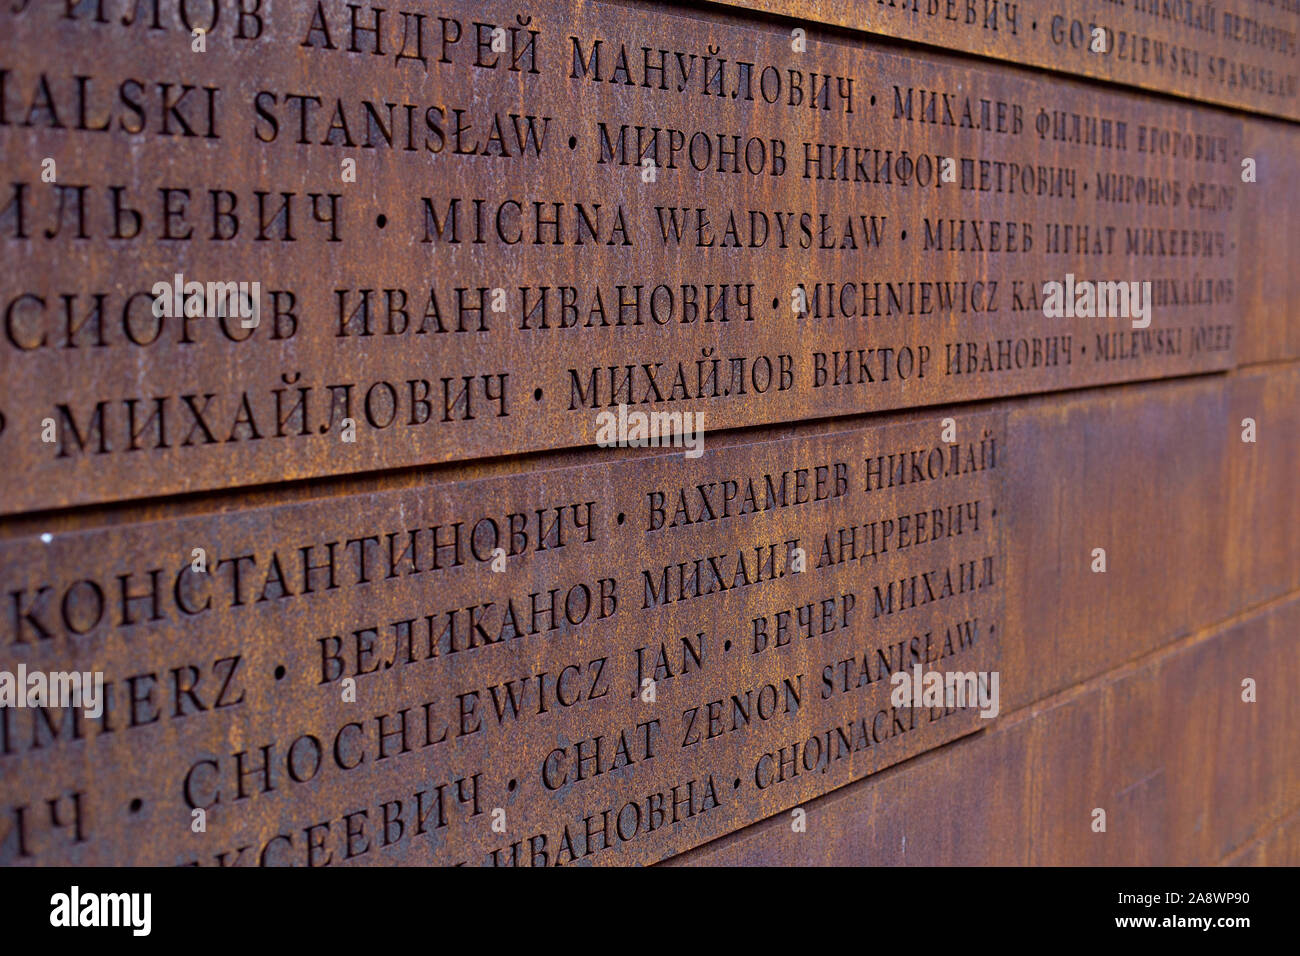 Katyn Russia 12.10.2019: International memorial to victims of political repression. Located in Katyn Forest. Exhibition Center. Stock Photo